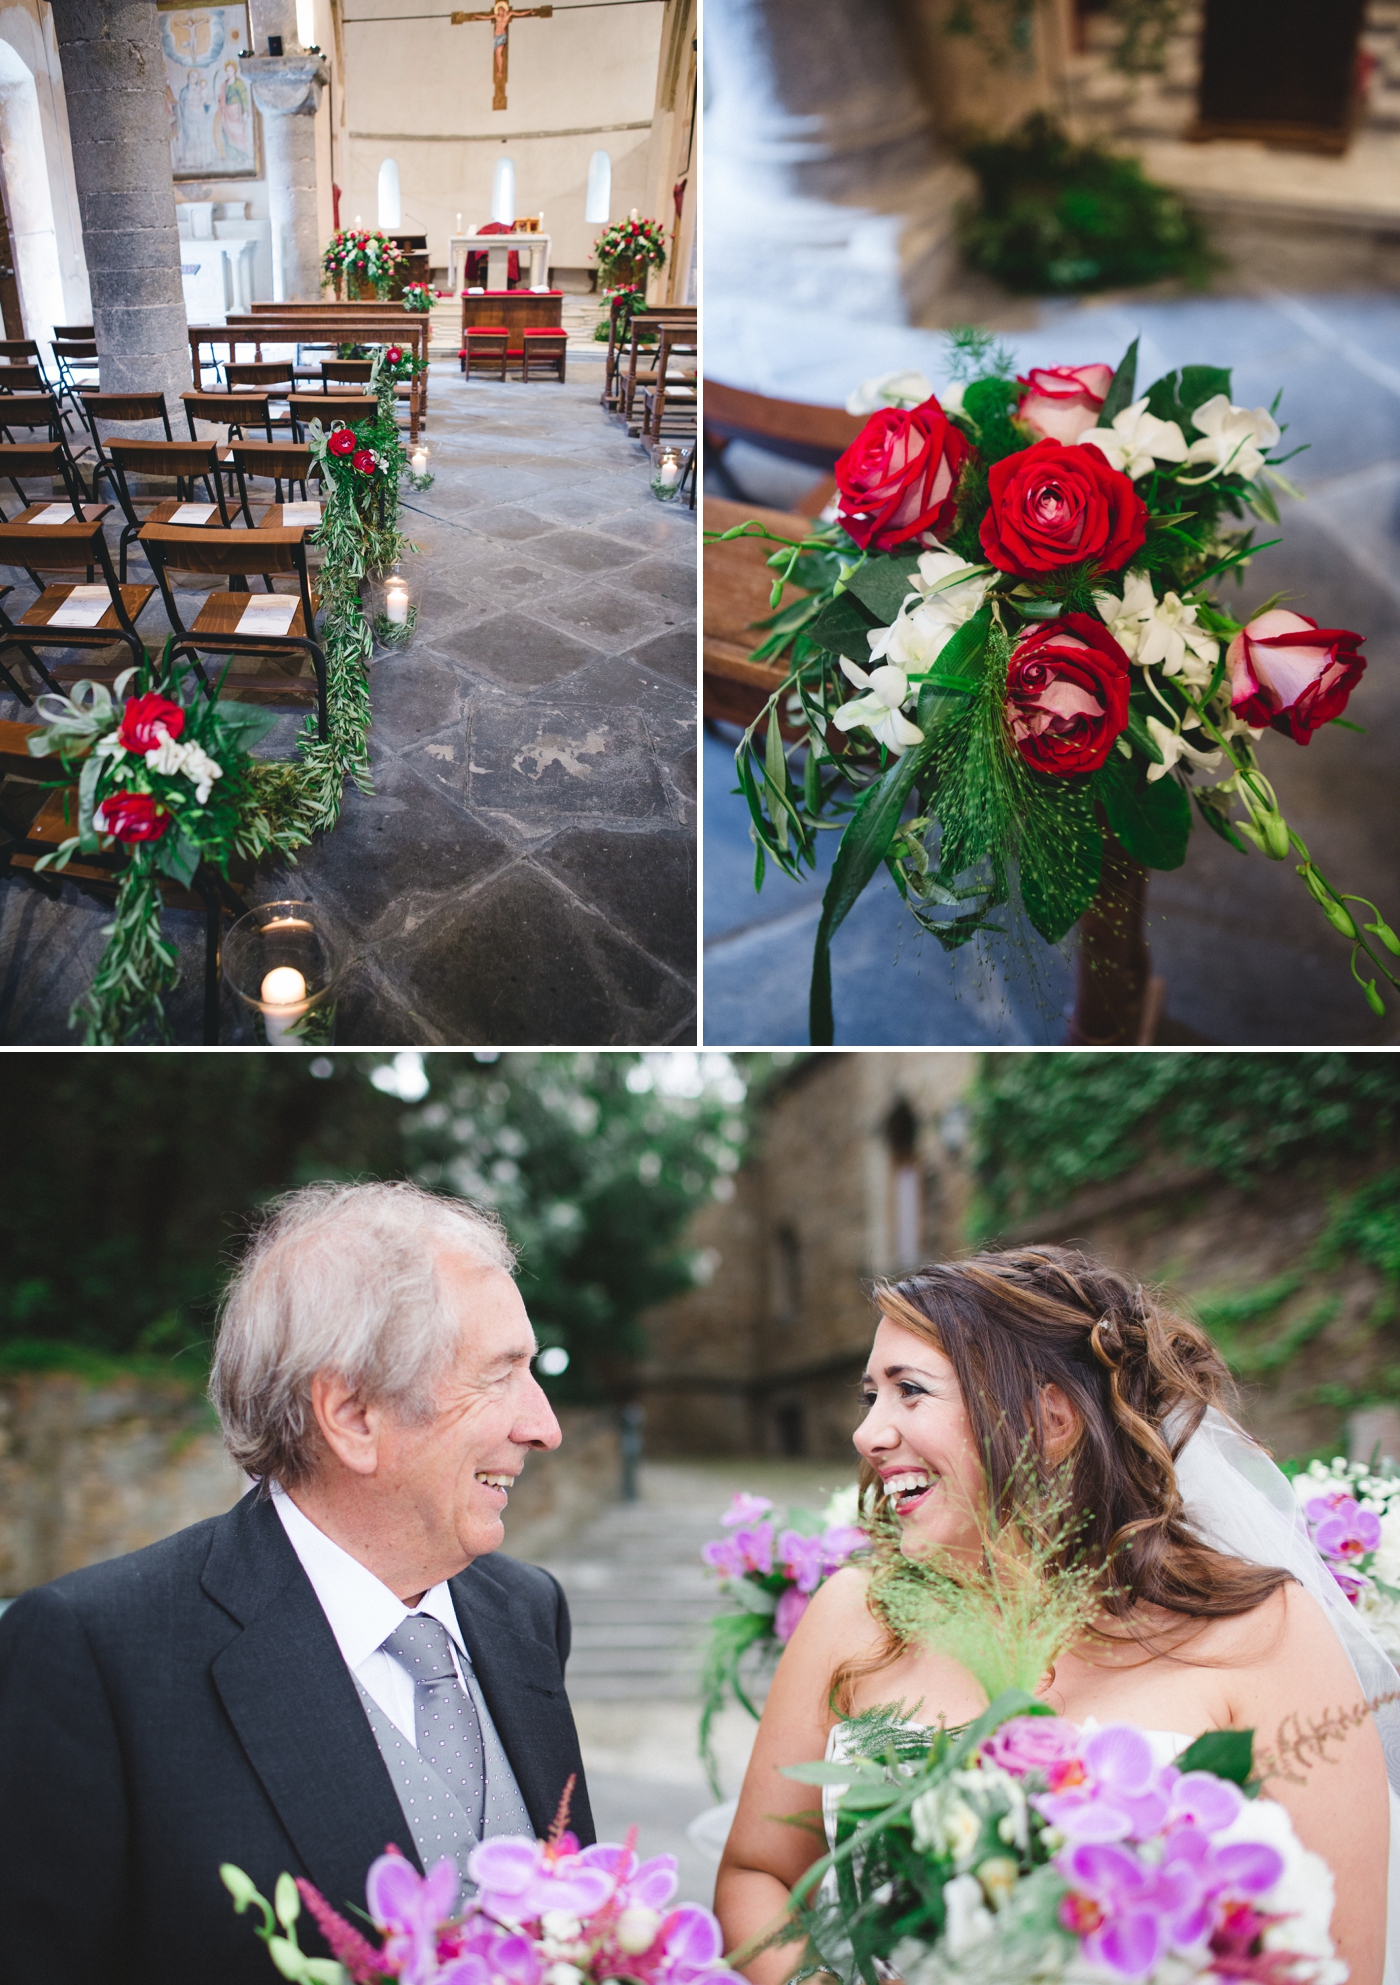 Italy Destination Wedding Packages by The Curious Italian and Izzy Hudgins Photography